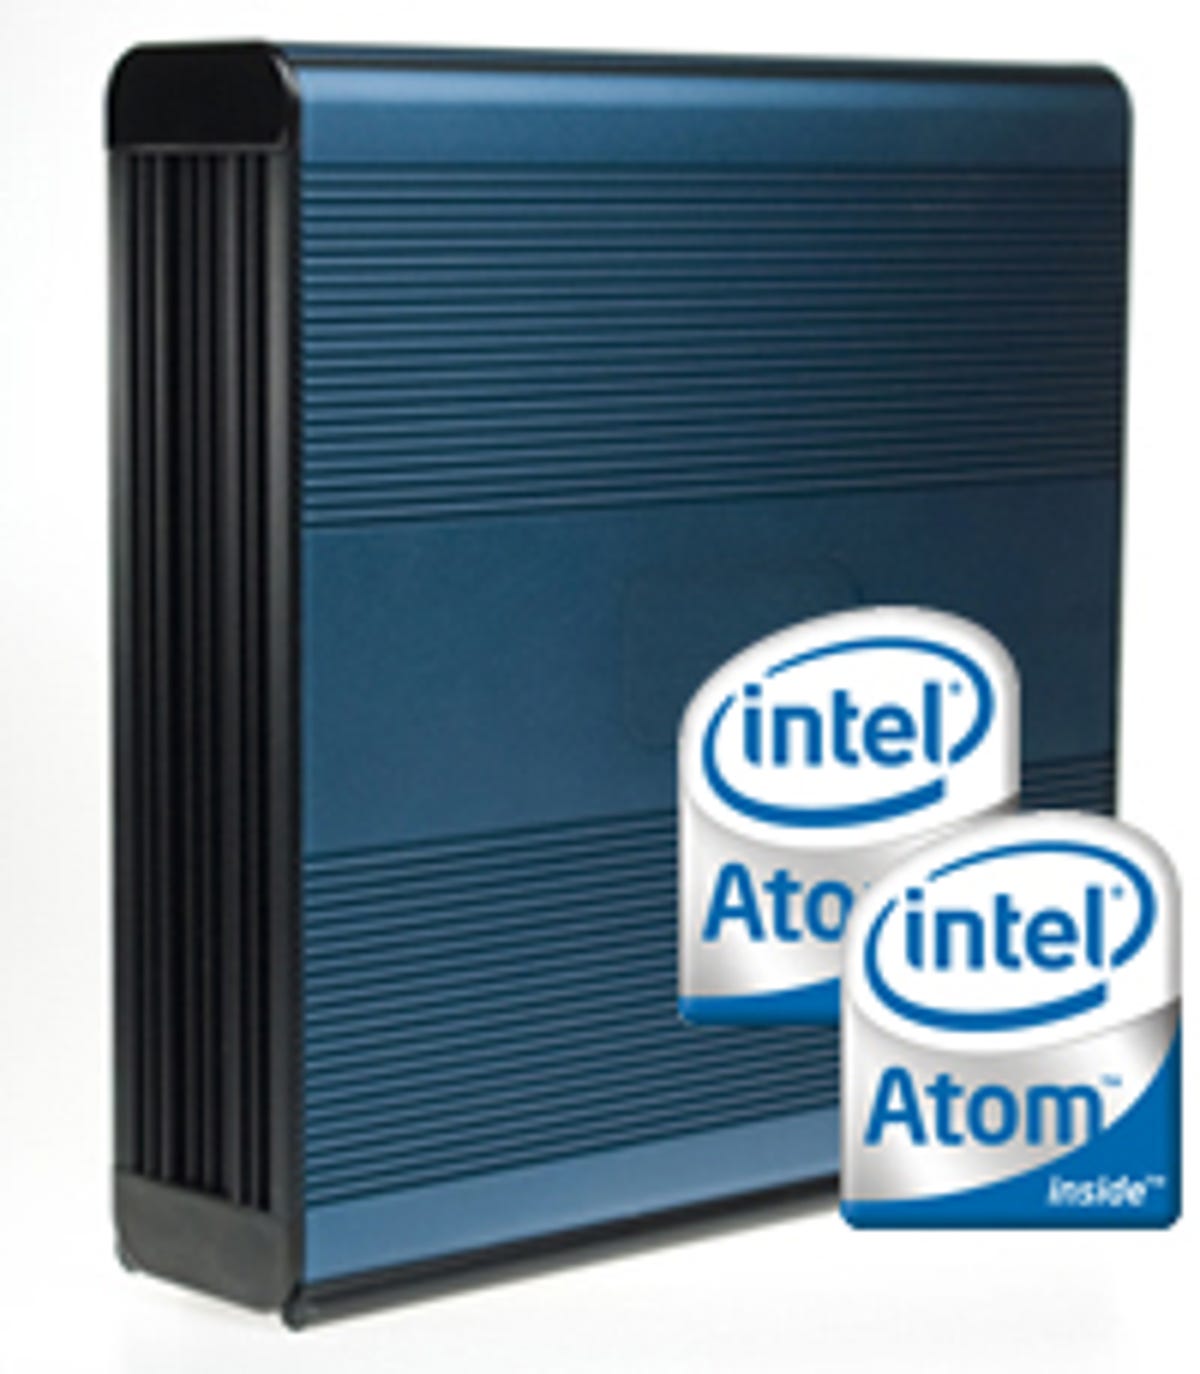 Tranquil PC T7-HSG Home Server uses the dual-core Atom 330